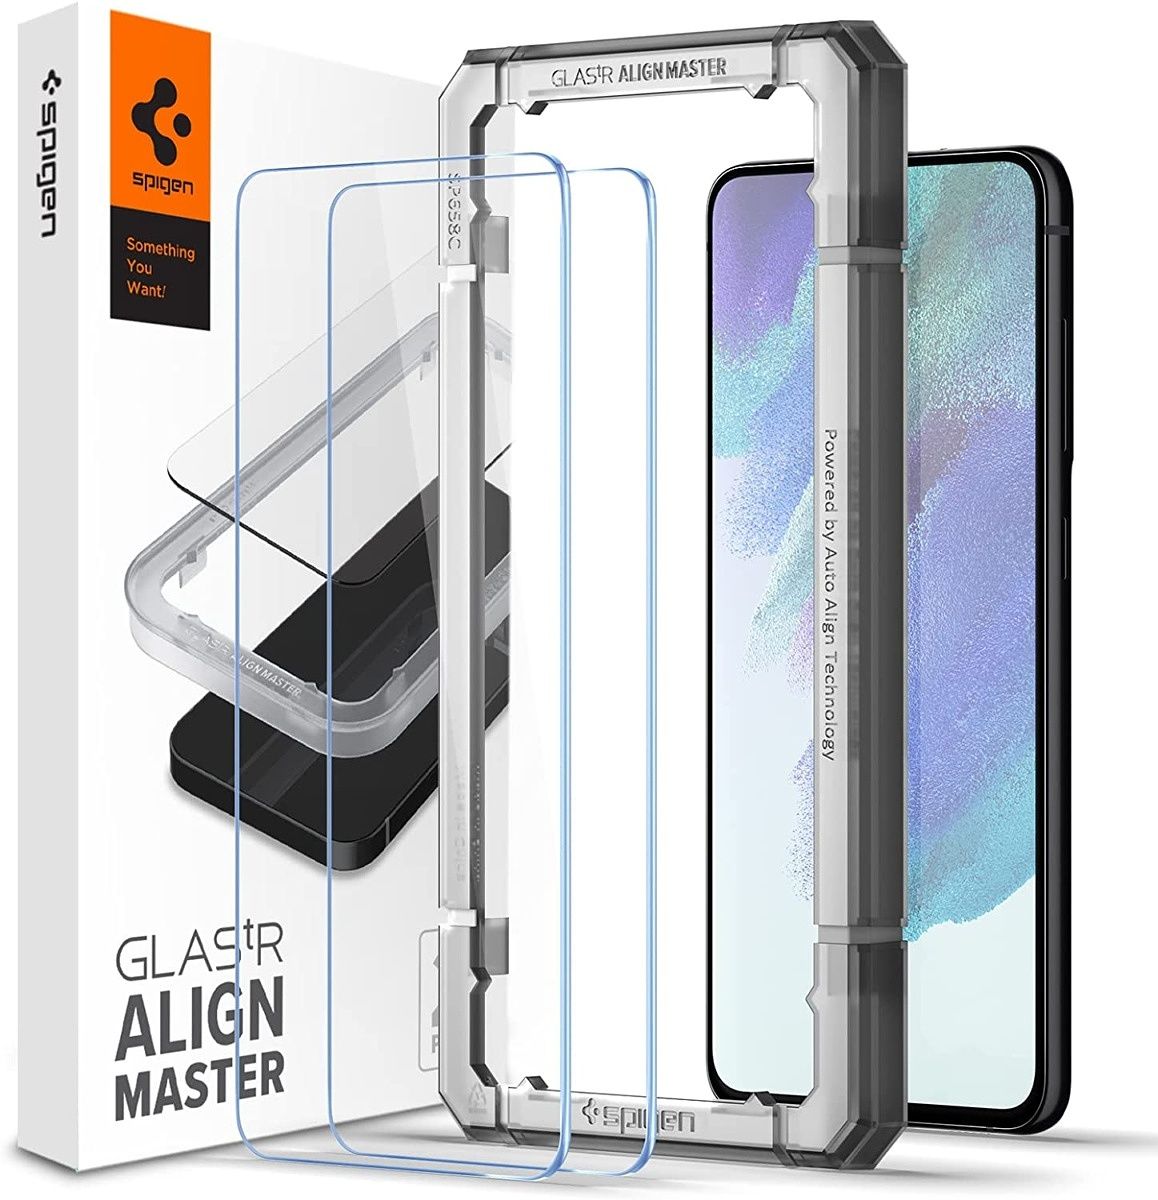 The Spigen Align Master screen protector comes with a frame to align the installation resulting in a perfect fit. The quality of the glass is also excellent.